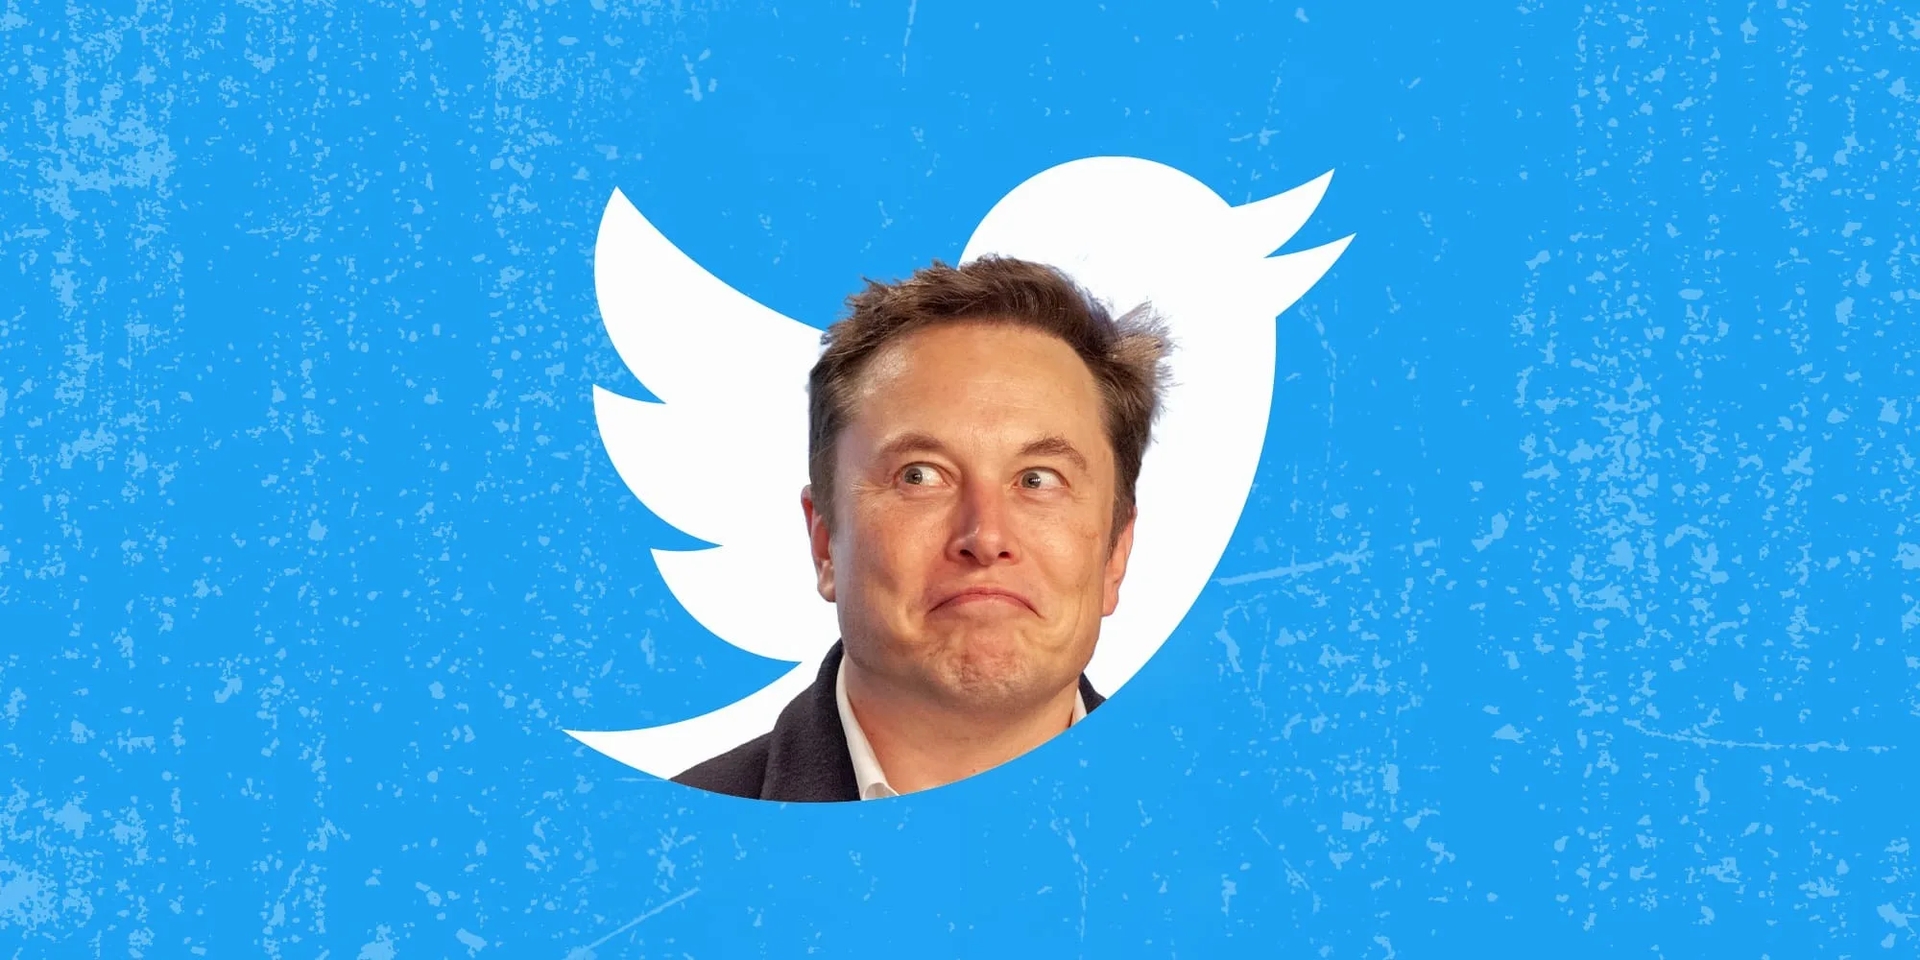 San Francisco officials are looking into whether Twitter's workplace space has been changed into beds and its headquarters into Elon Musk Twitter hotel due...